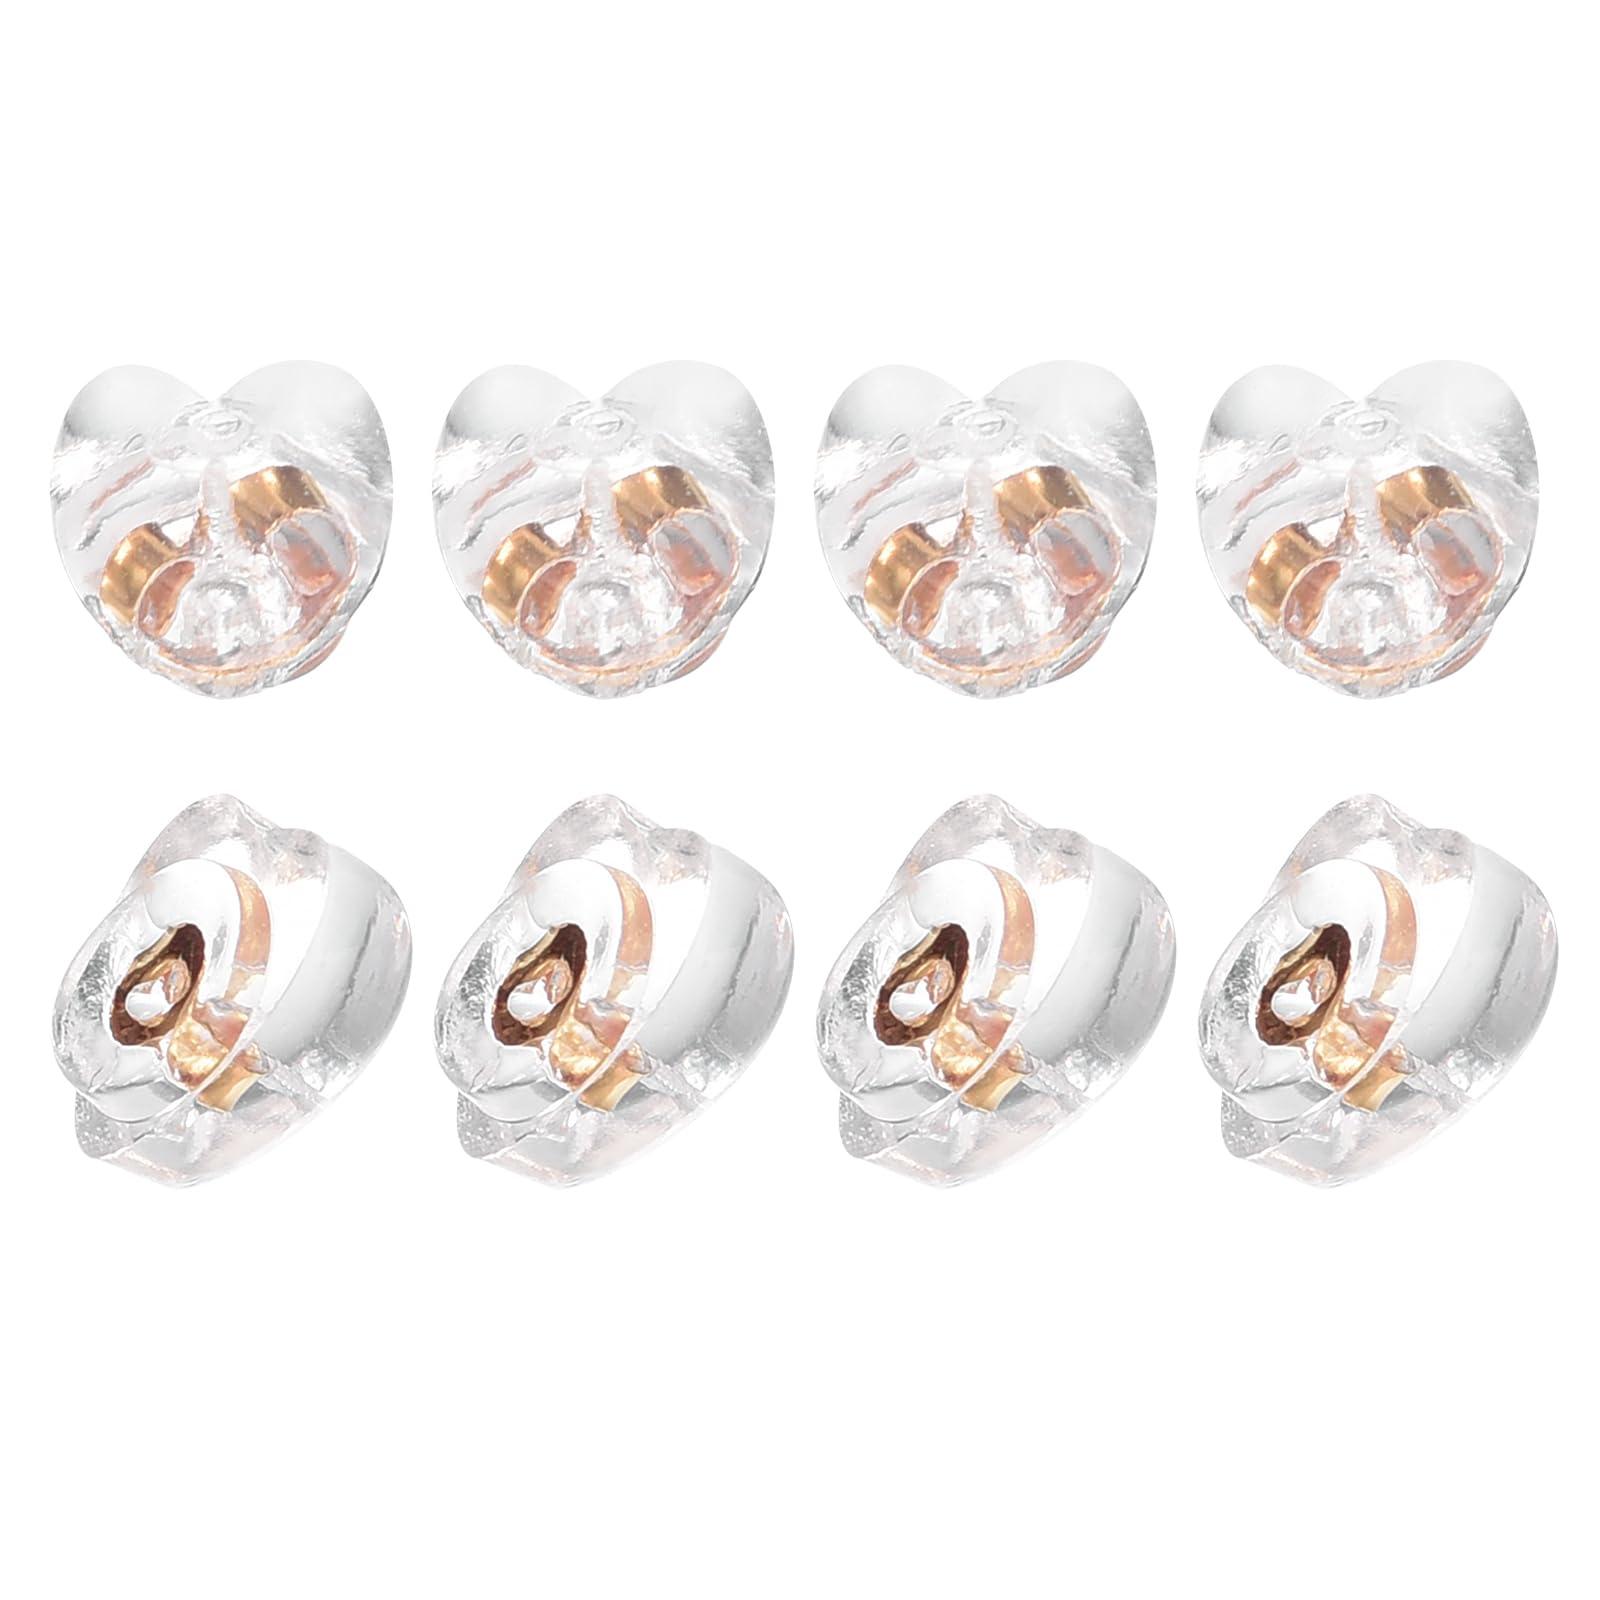 sourcing map 8Pcs Silicone Earring Backs, Soft Clear Earring Stoppers Replacement Heart Shape Earring Backs for Studs Fish Hook Earrings, 3.8mm Rose Gold